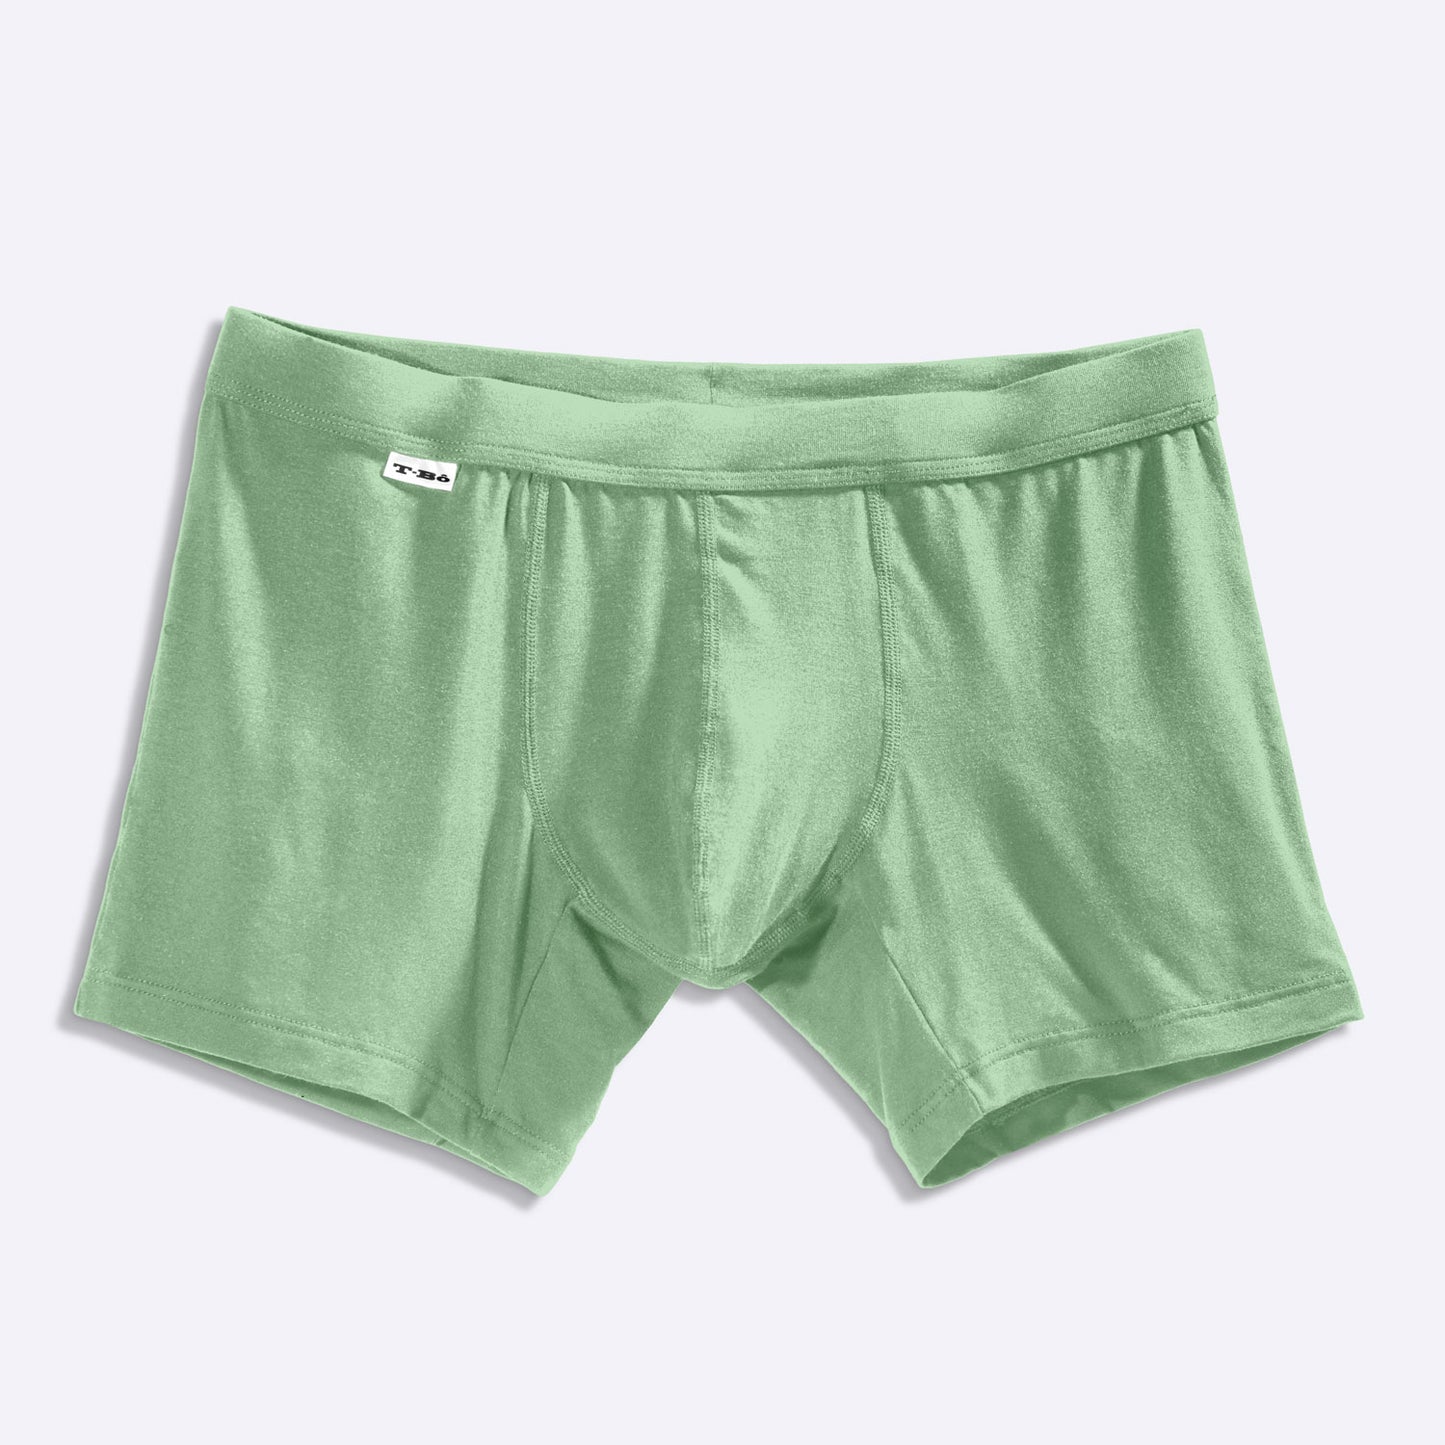 The Mint Green Boxer Brief